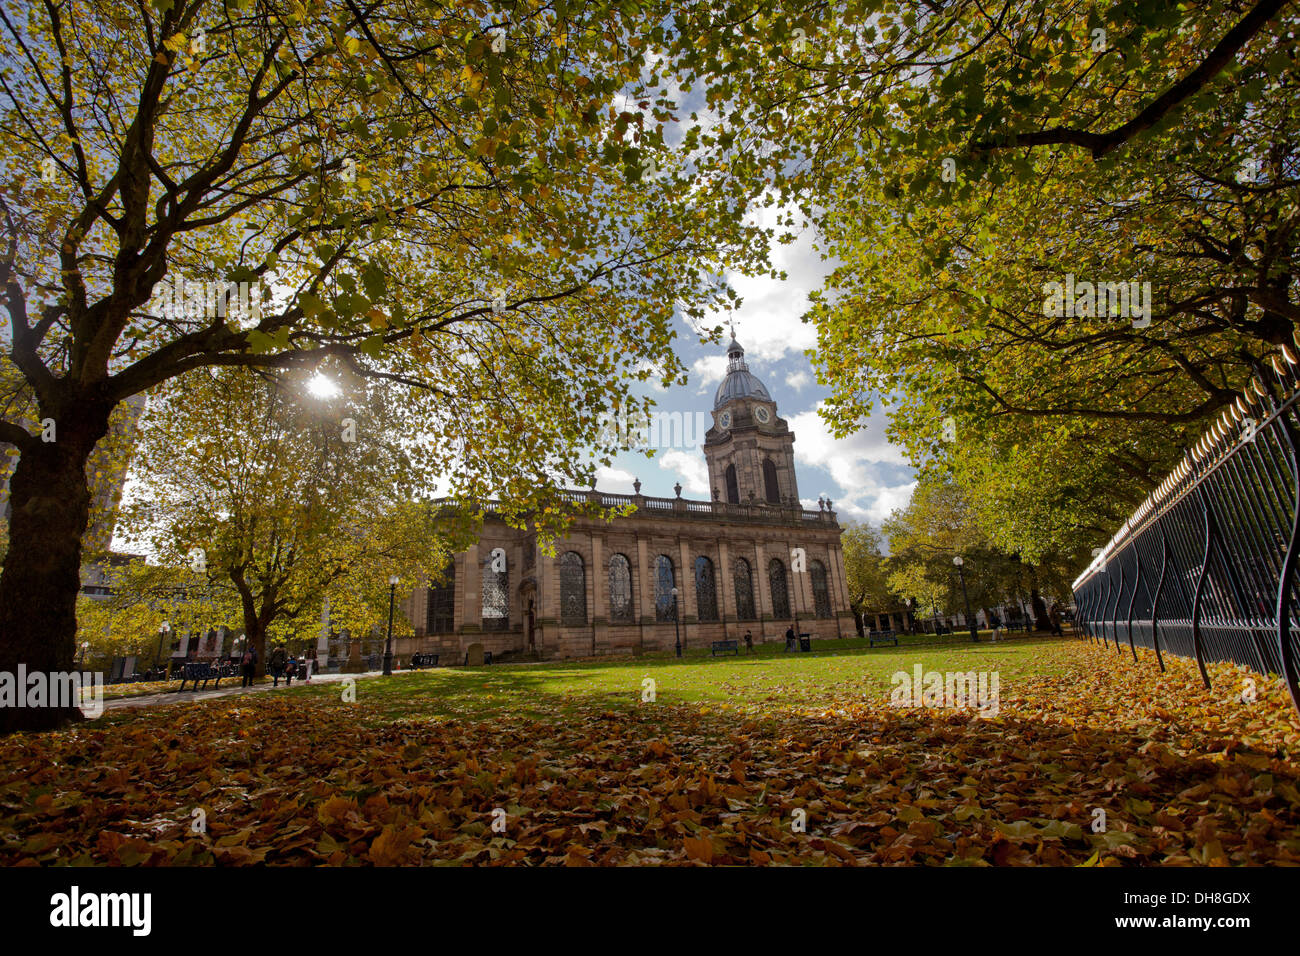 St Philips Cathedral grounds, Birmingham, in autumn with a sunny sky and fallen leaves Stock Photo